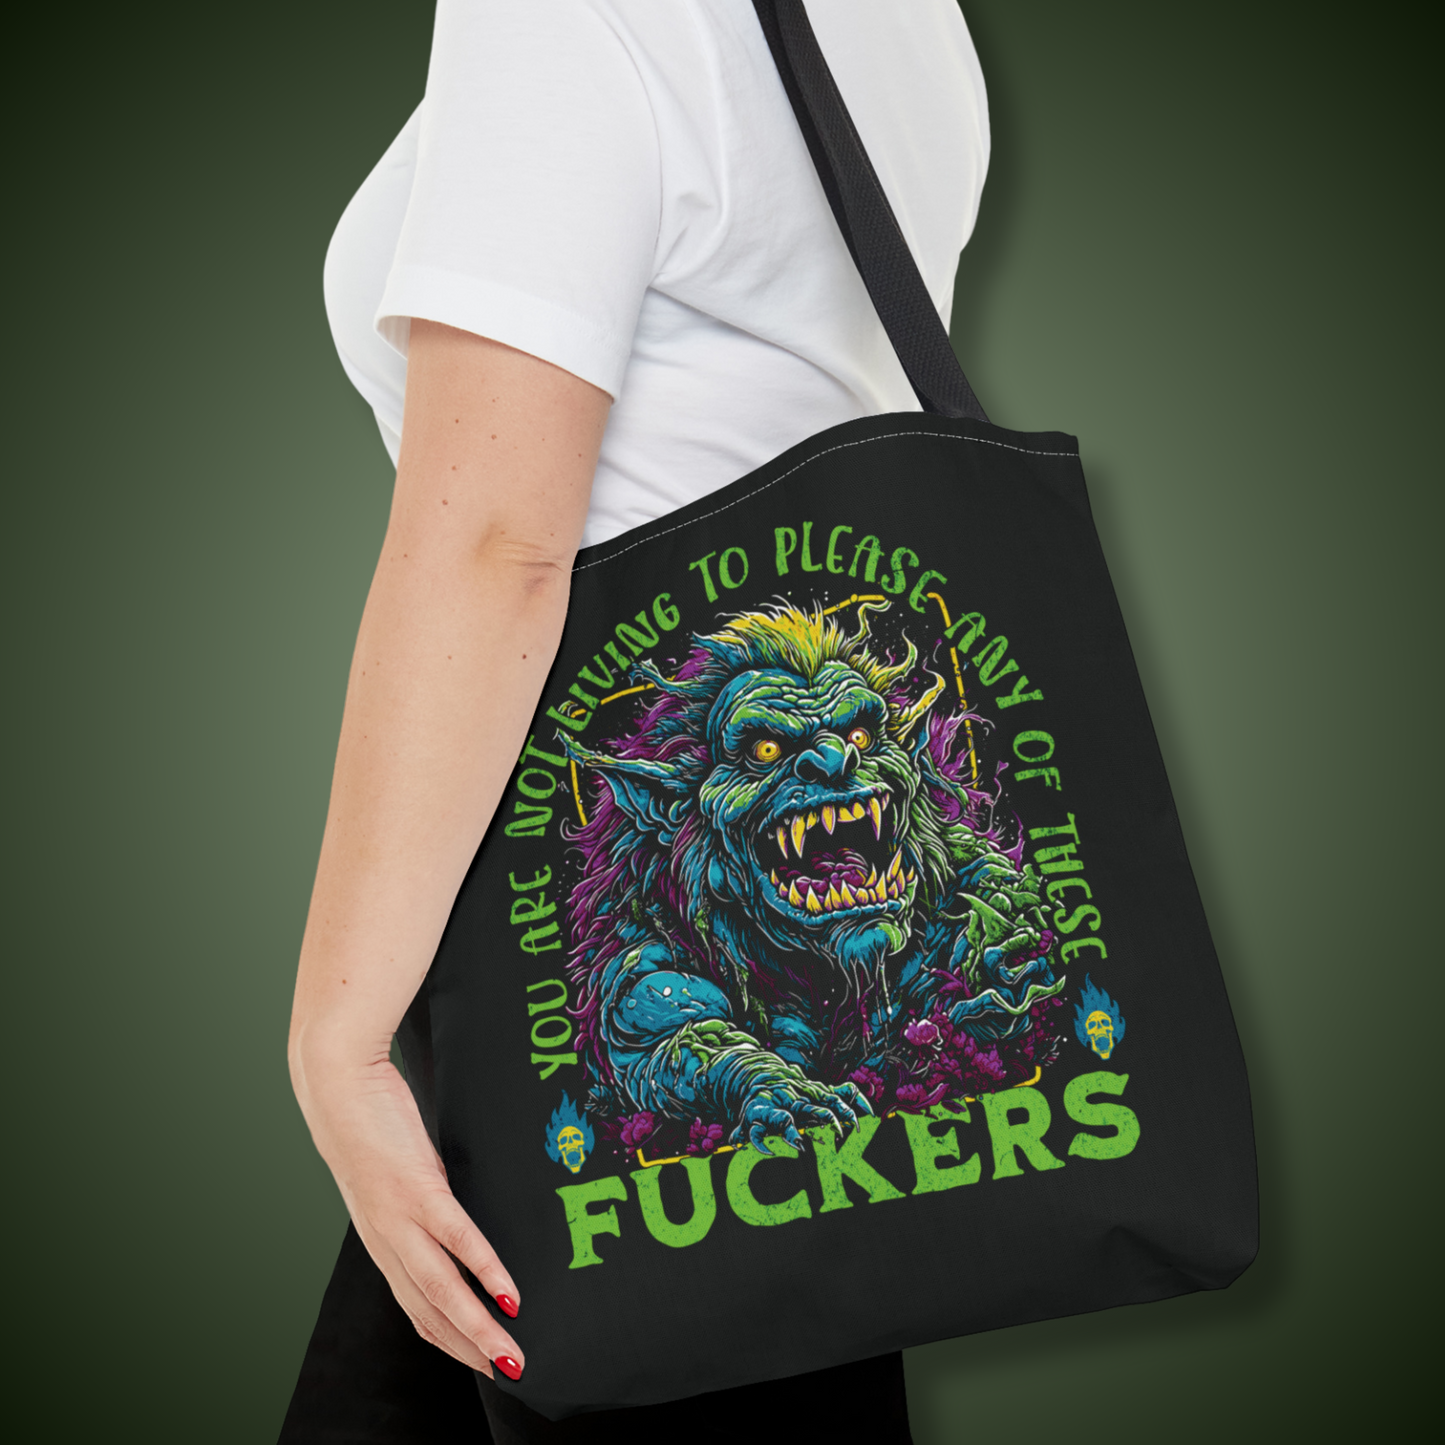 These Fuckers Tote Bag